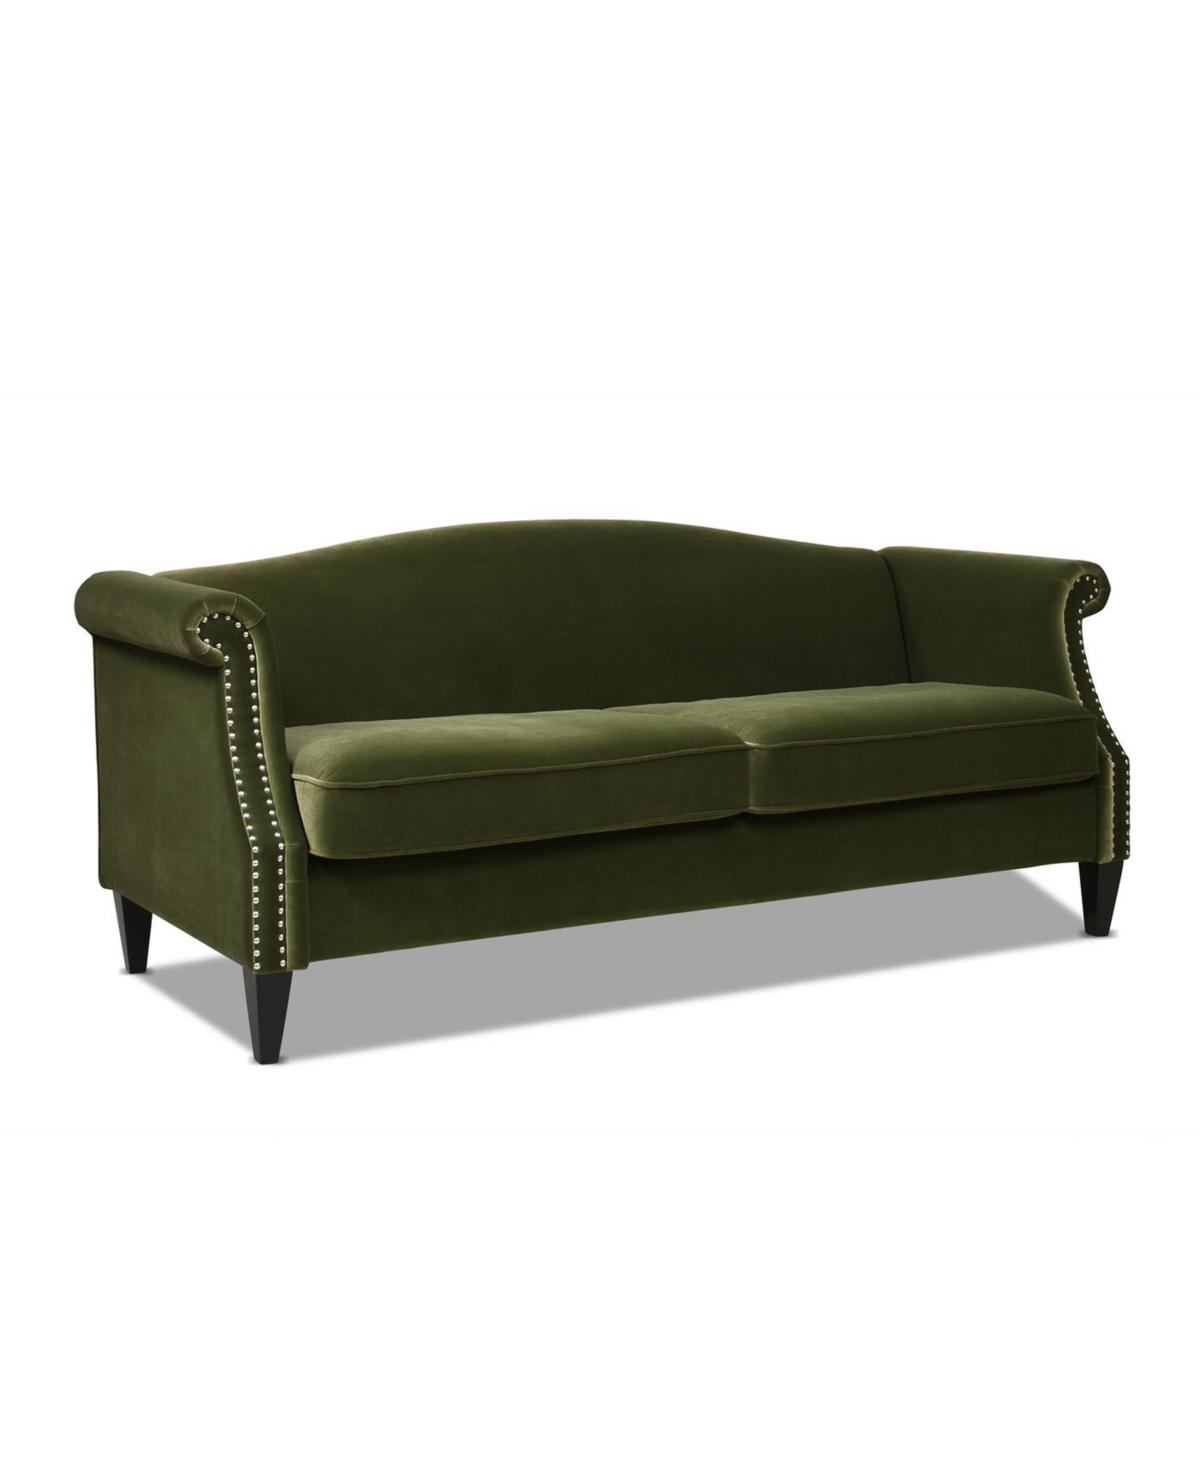 Jennifer Taylor Home Elaine 77" Camel Back Sofa With Nailhead Accents In Olive Green